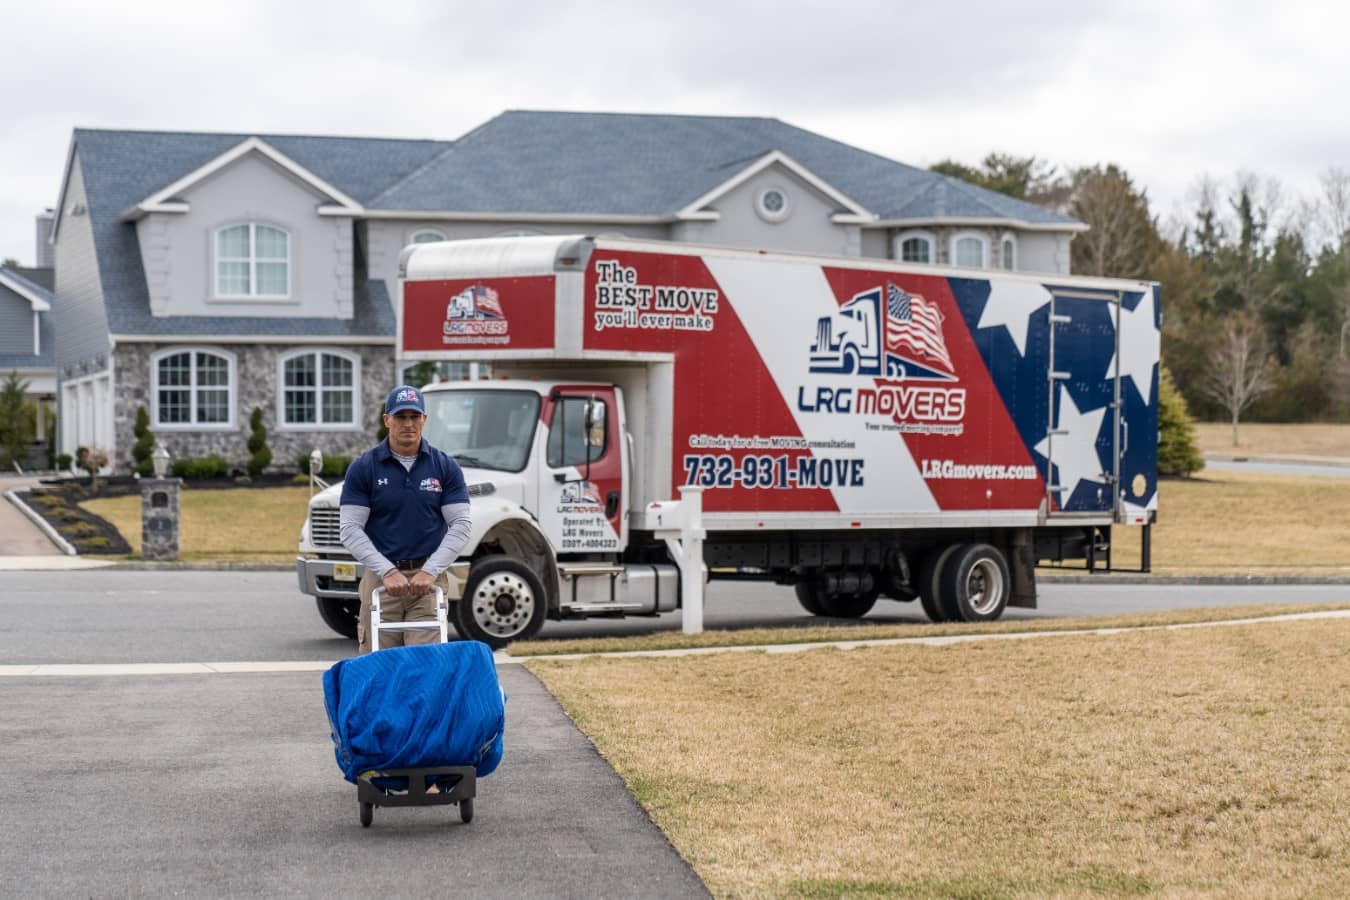 An LRG mover transporting a box. In the background is an LRG removal truck.